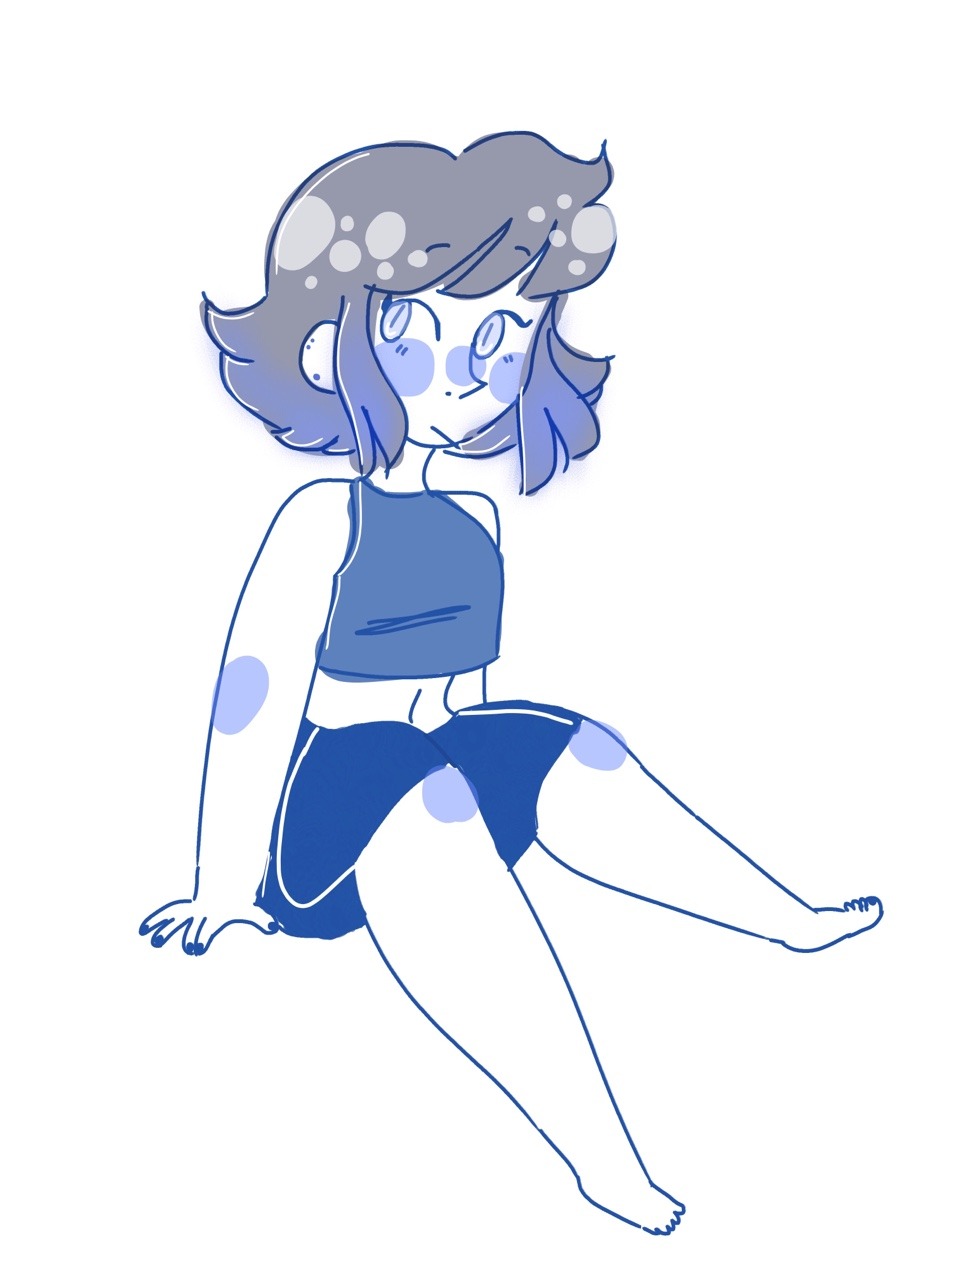 a human lapis i drew a few days ago, ive changed my style a bit and im finally happy with it